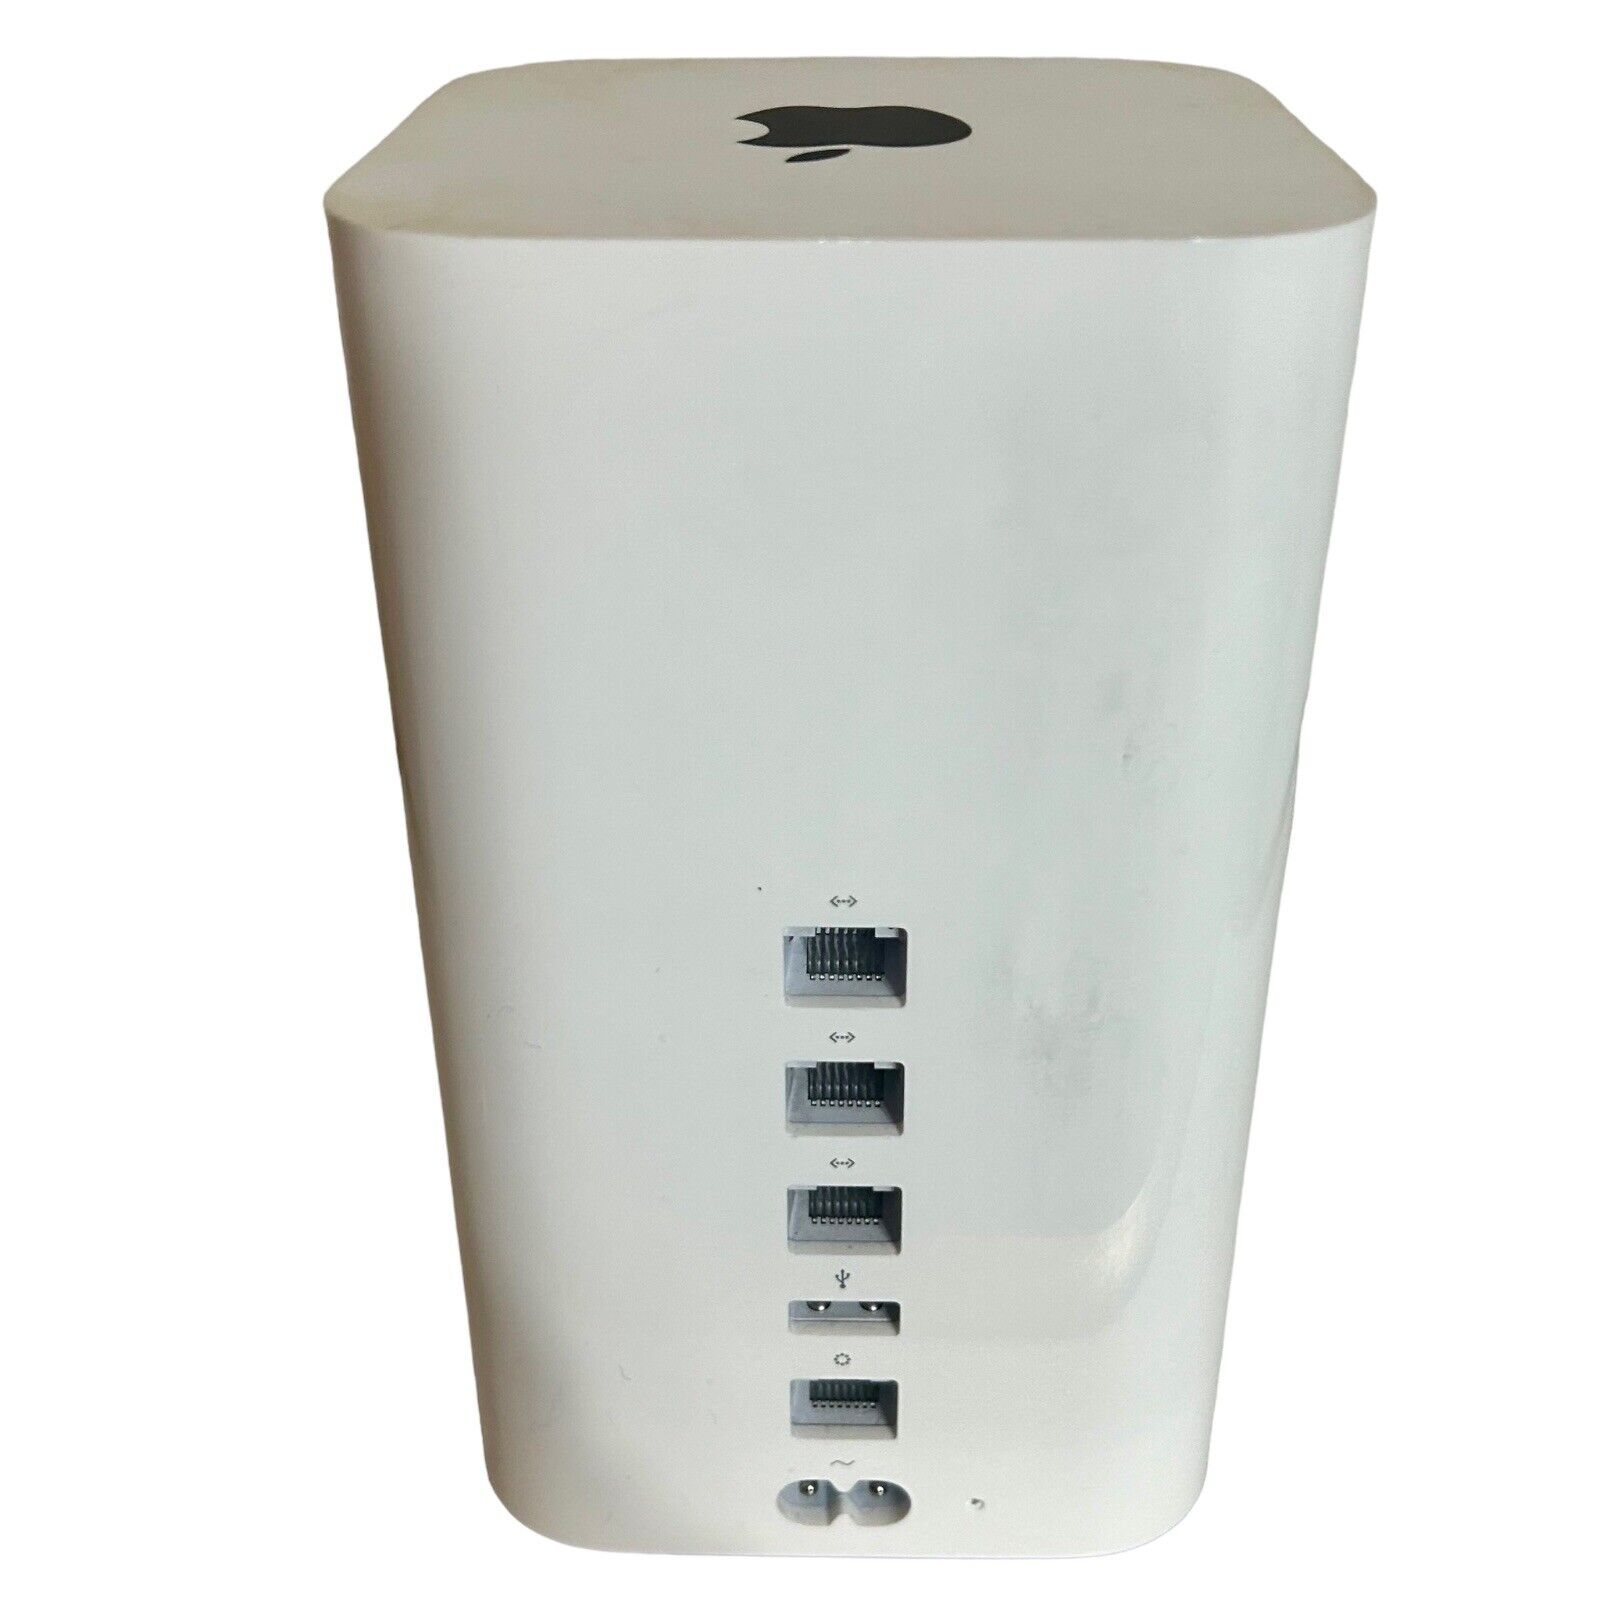 Apple AirPort Extreme Base Station Wireless Router 6th Gen A1521 w/powercord